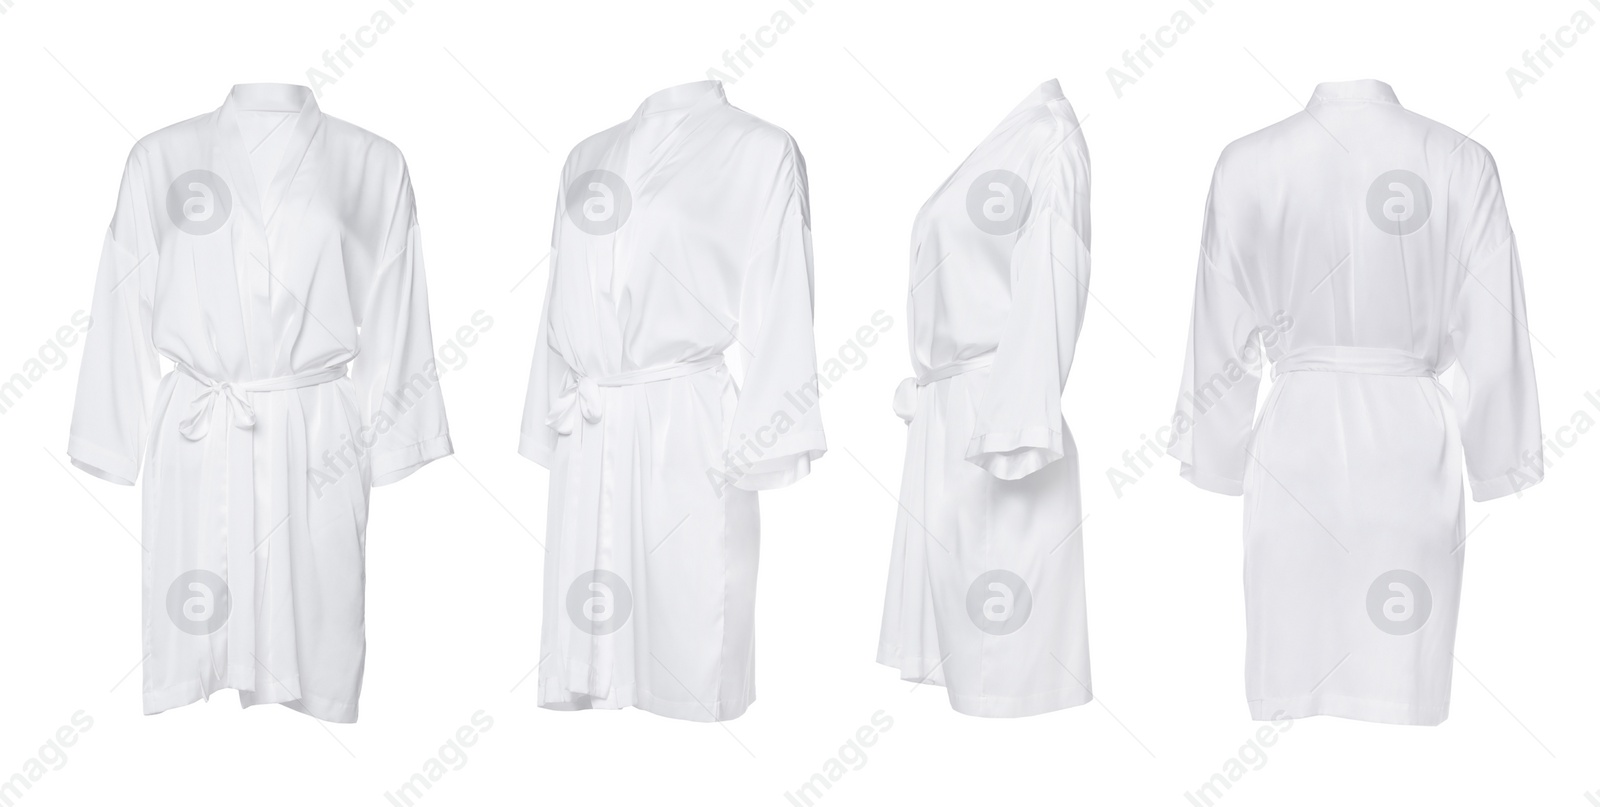 Image of Collage with clean silk bathrobe on white background, different views